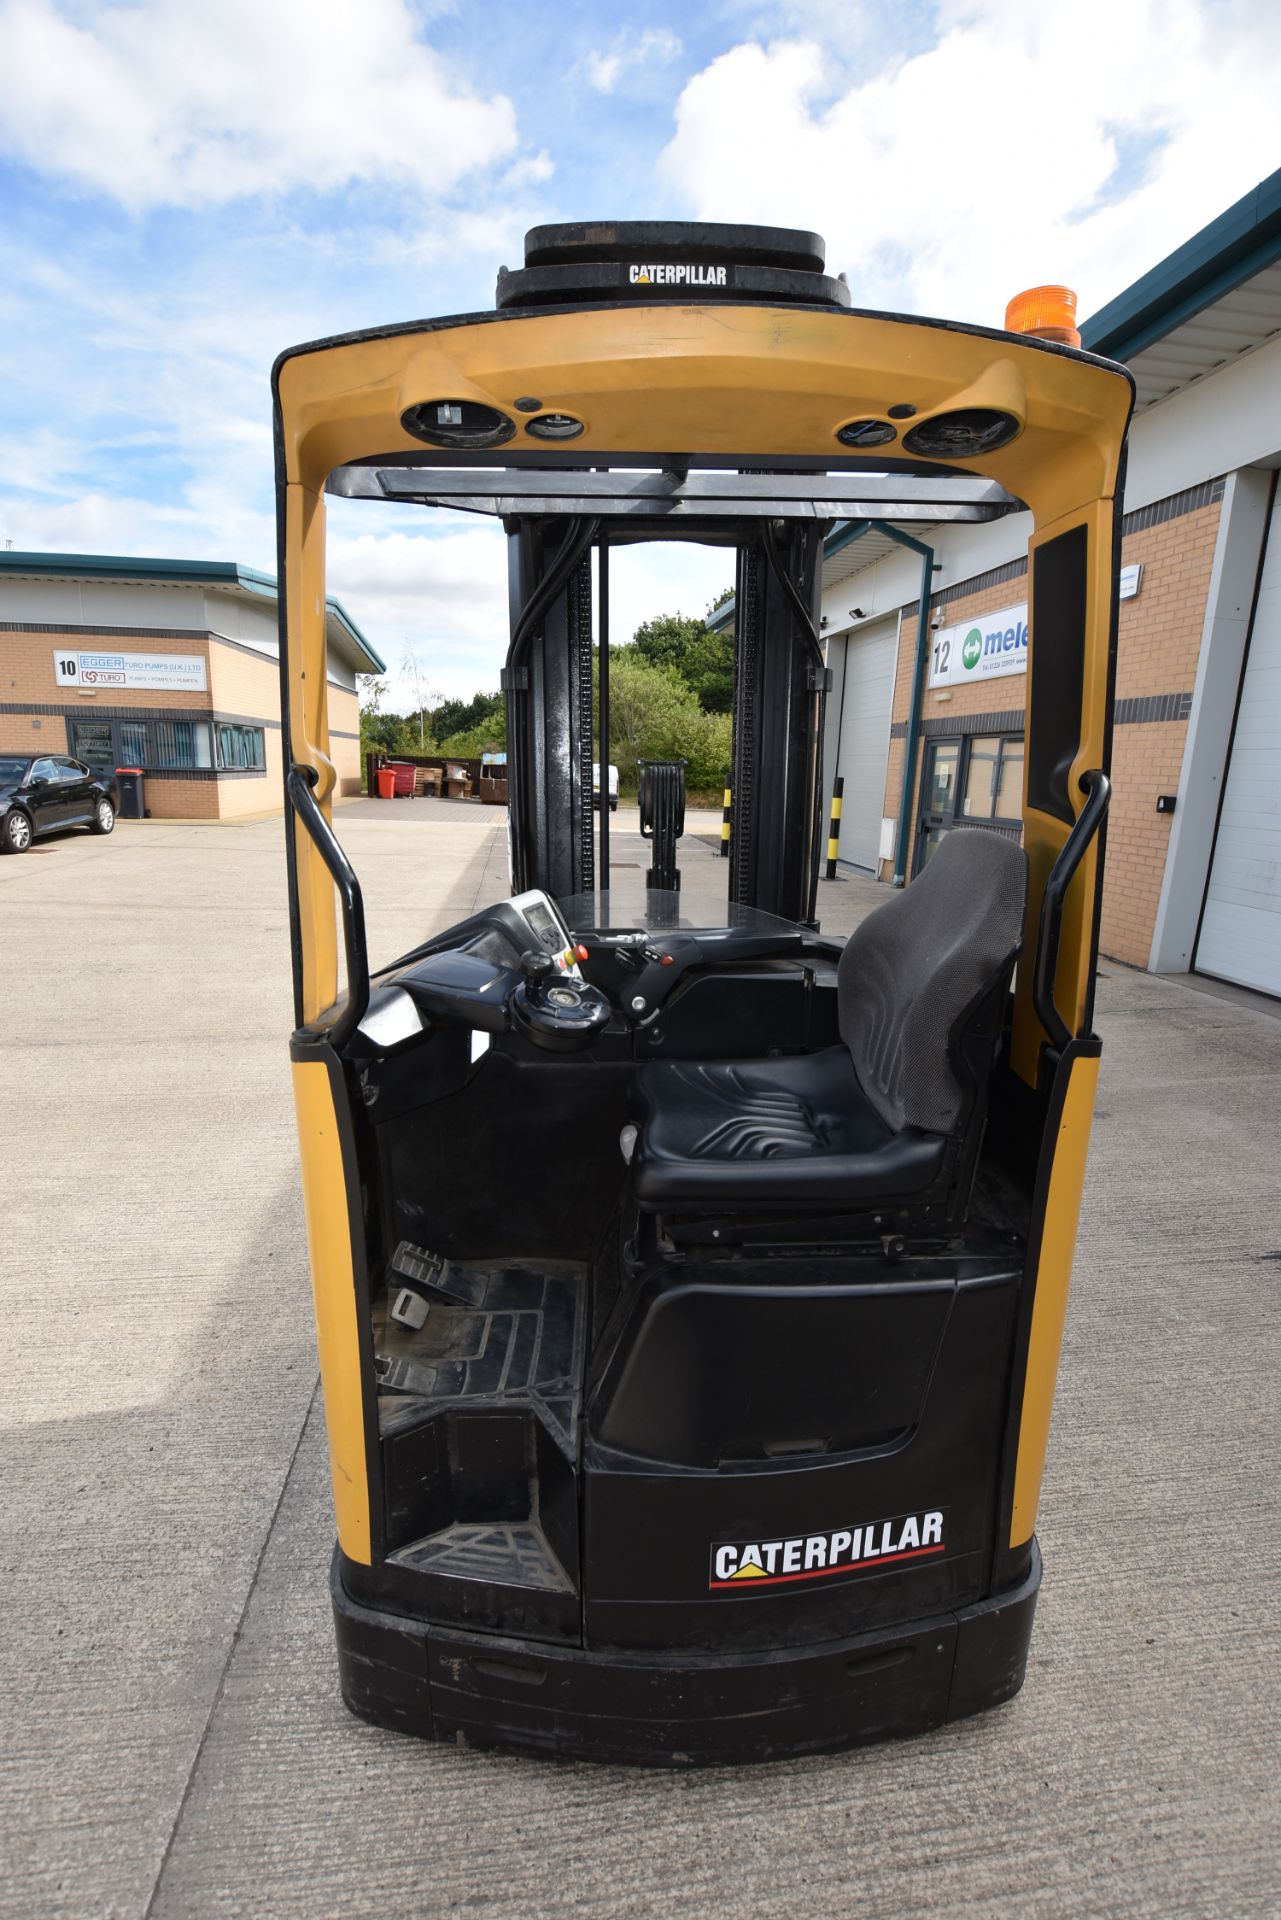 Caterpillar NR20NH 2000kg cap. Electric Reach Truck, serial no. 8NN800 41, year of manufacture 2007, - Image 4 of 6